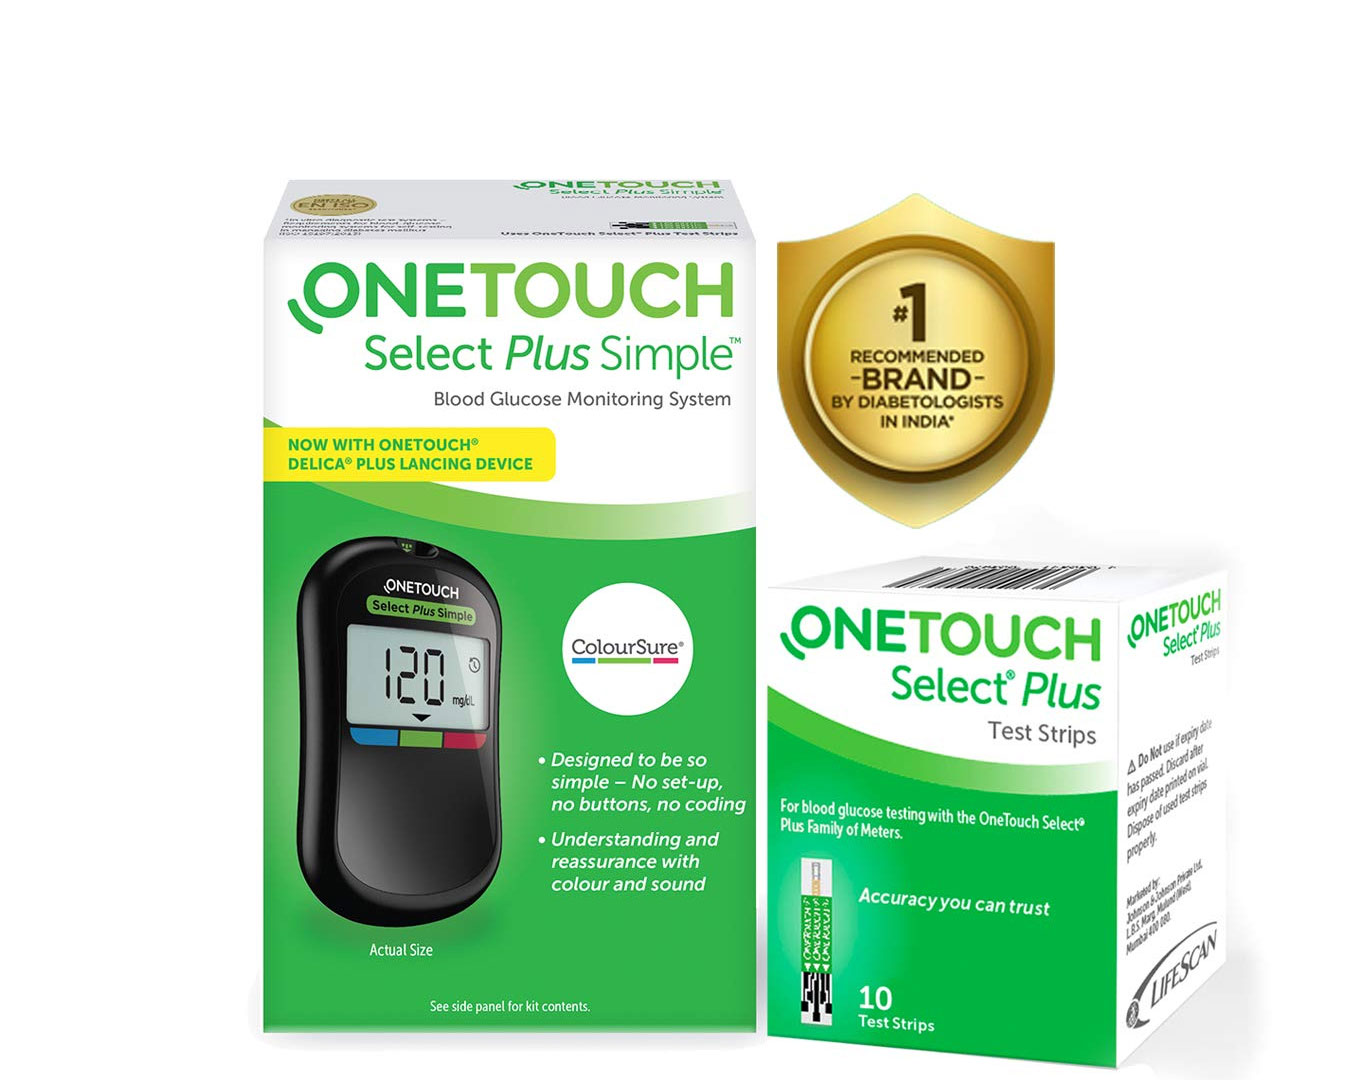 best-glucometers-in-india - One-Touch Select Plus Simple Blood Glucose Monitor